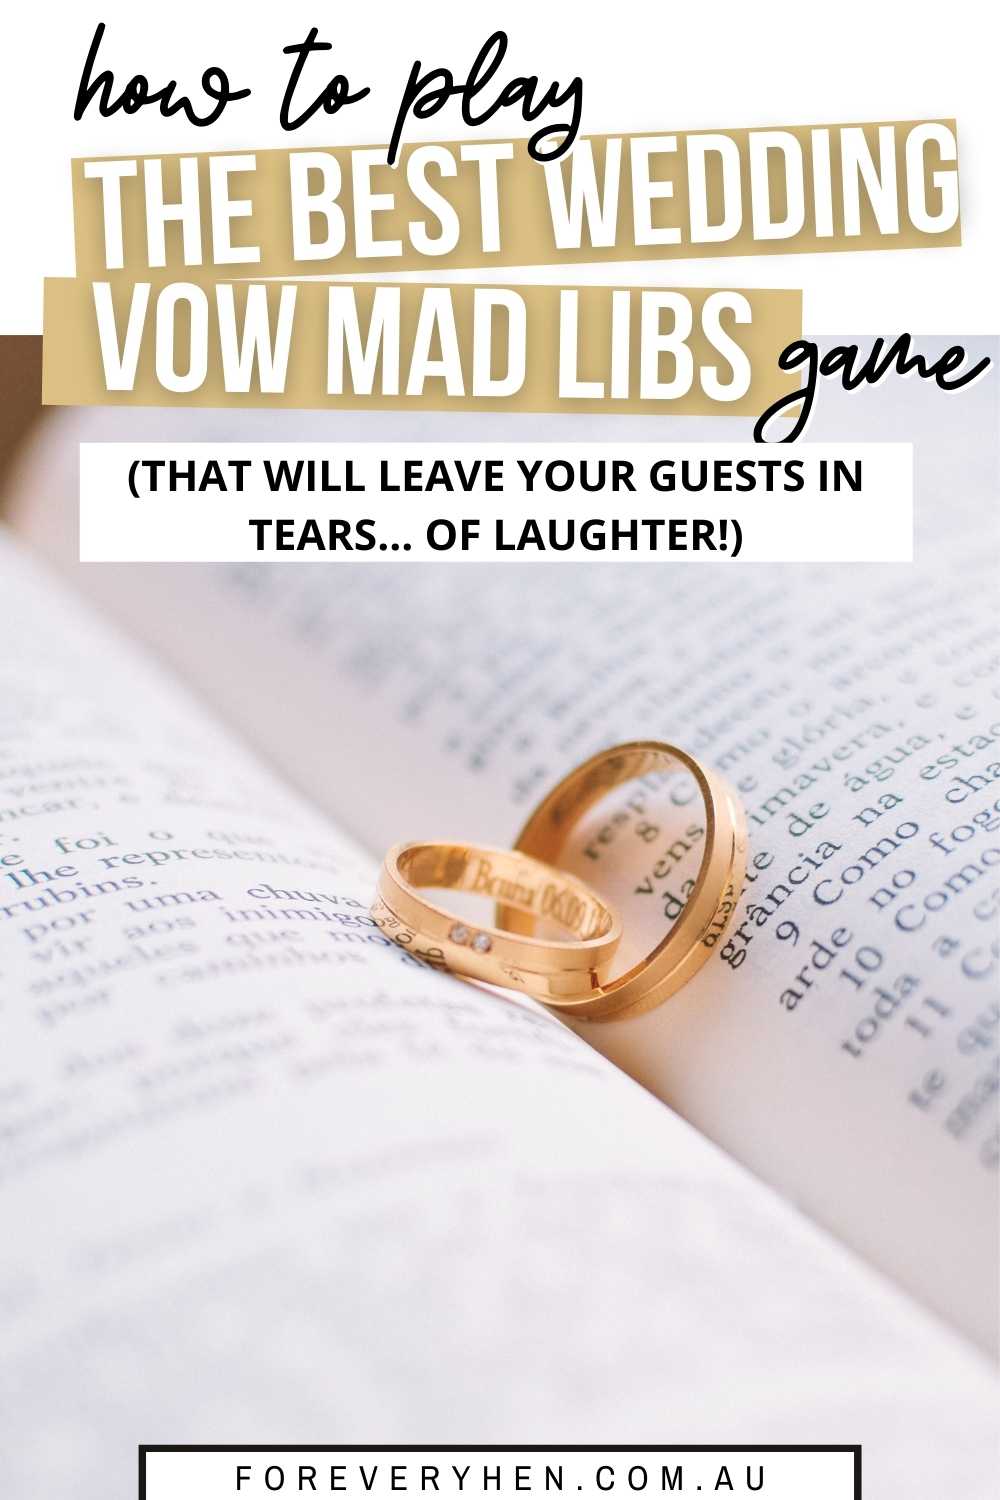 Wedding Vow Mad Libs Game